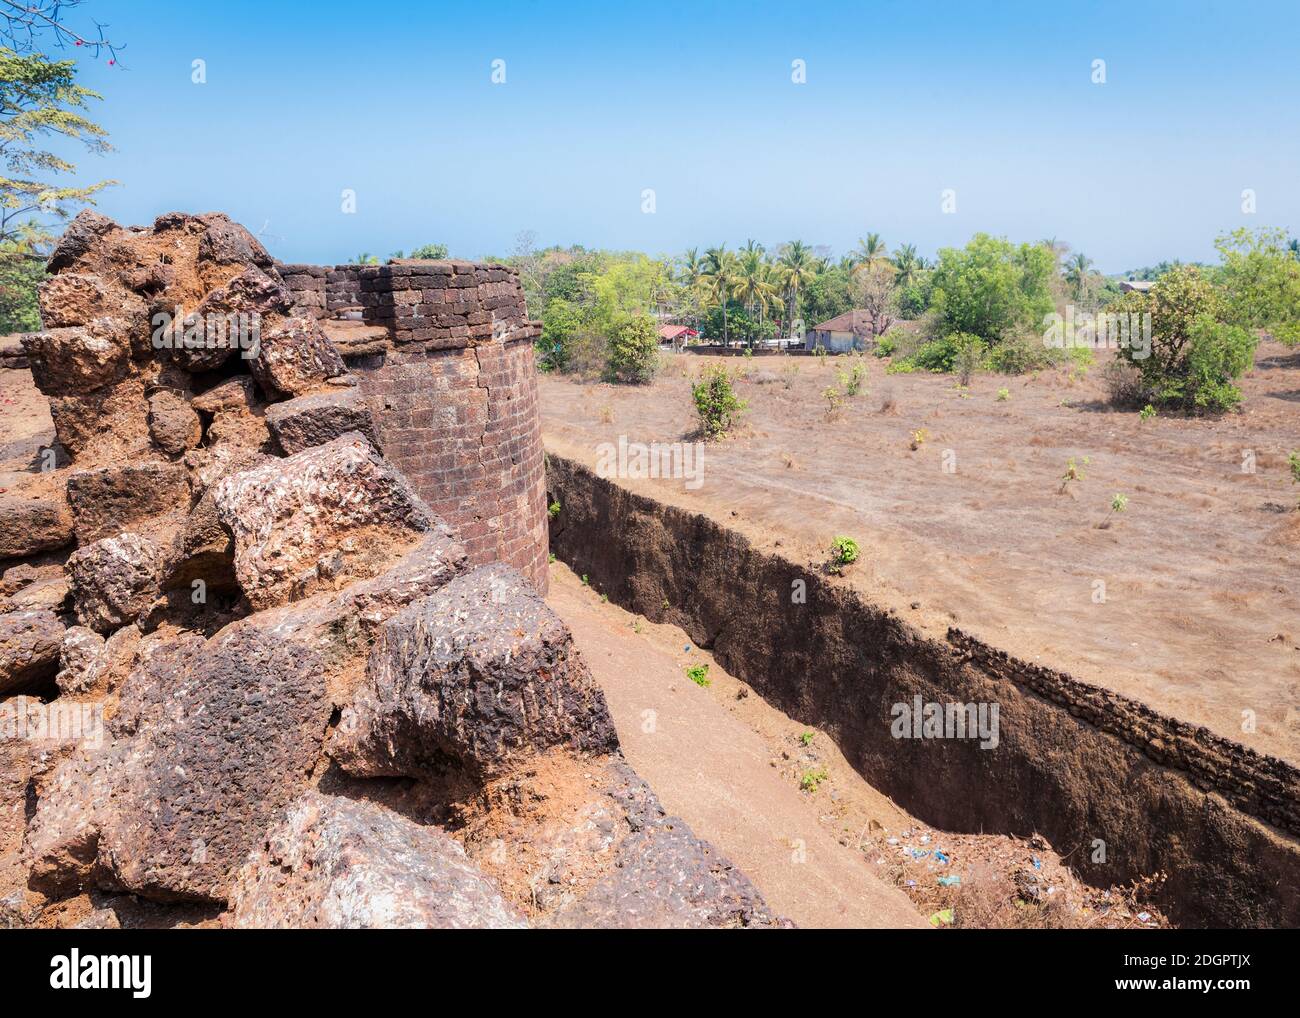 View of the old stone tower of the Portuguese fortress Fort Cabo De Rama near the village in Goa, India Stock Photo